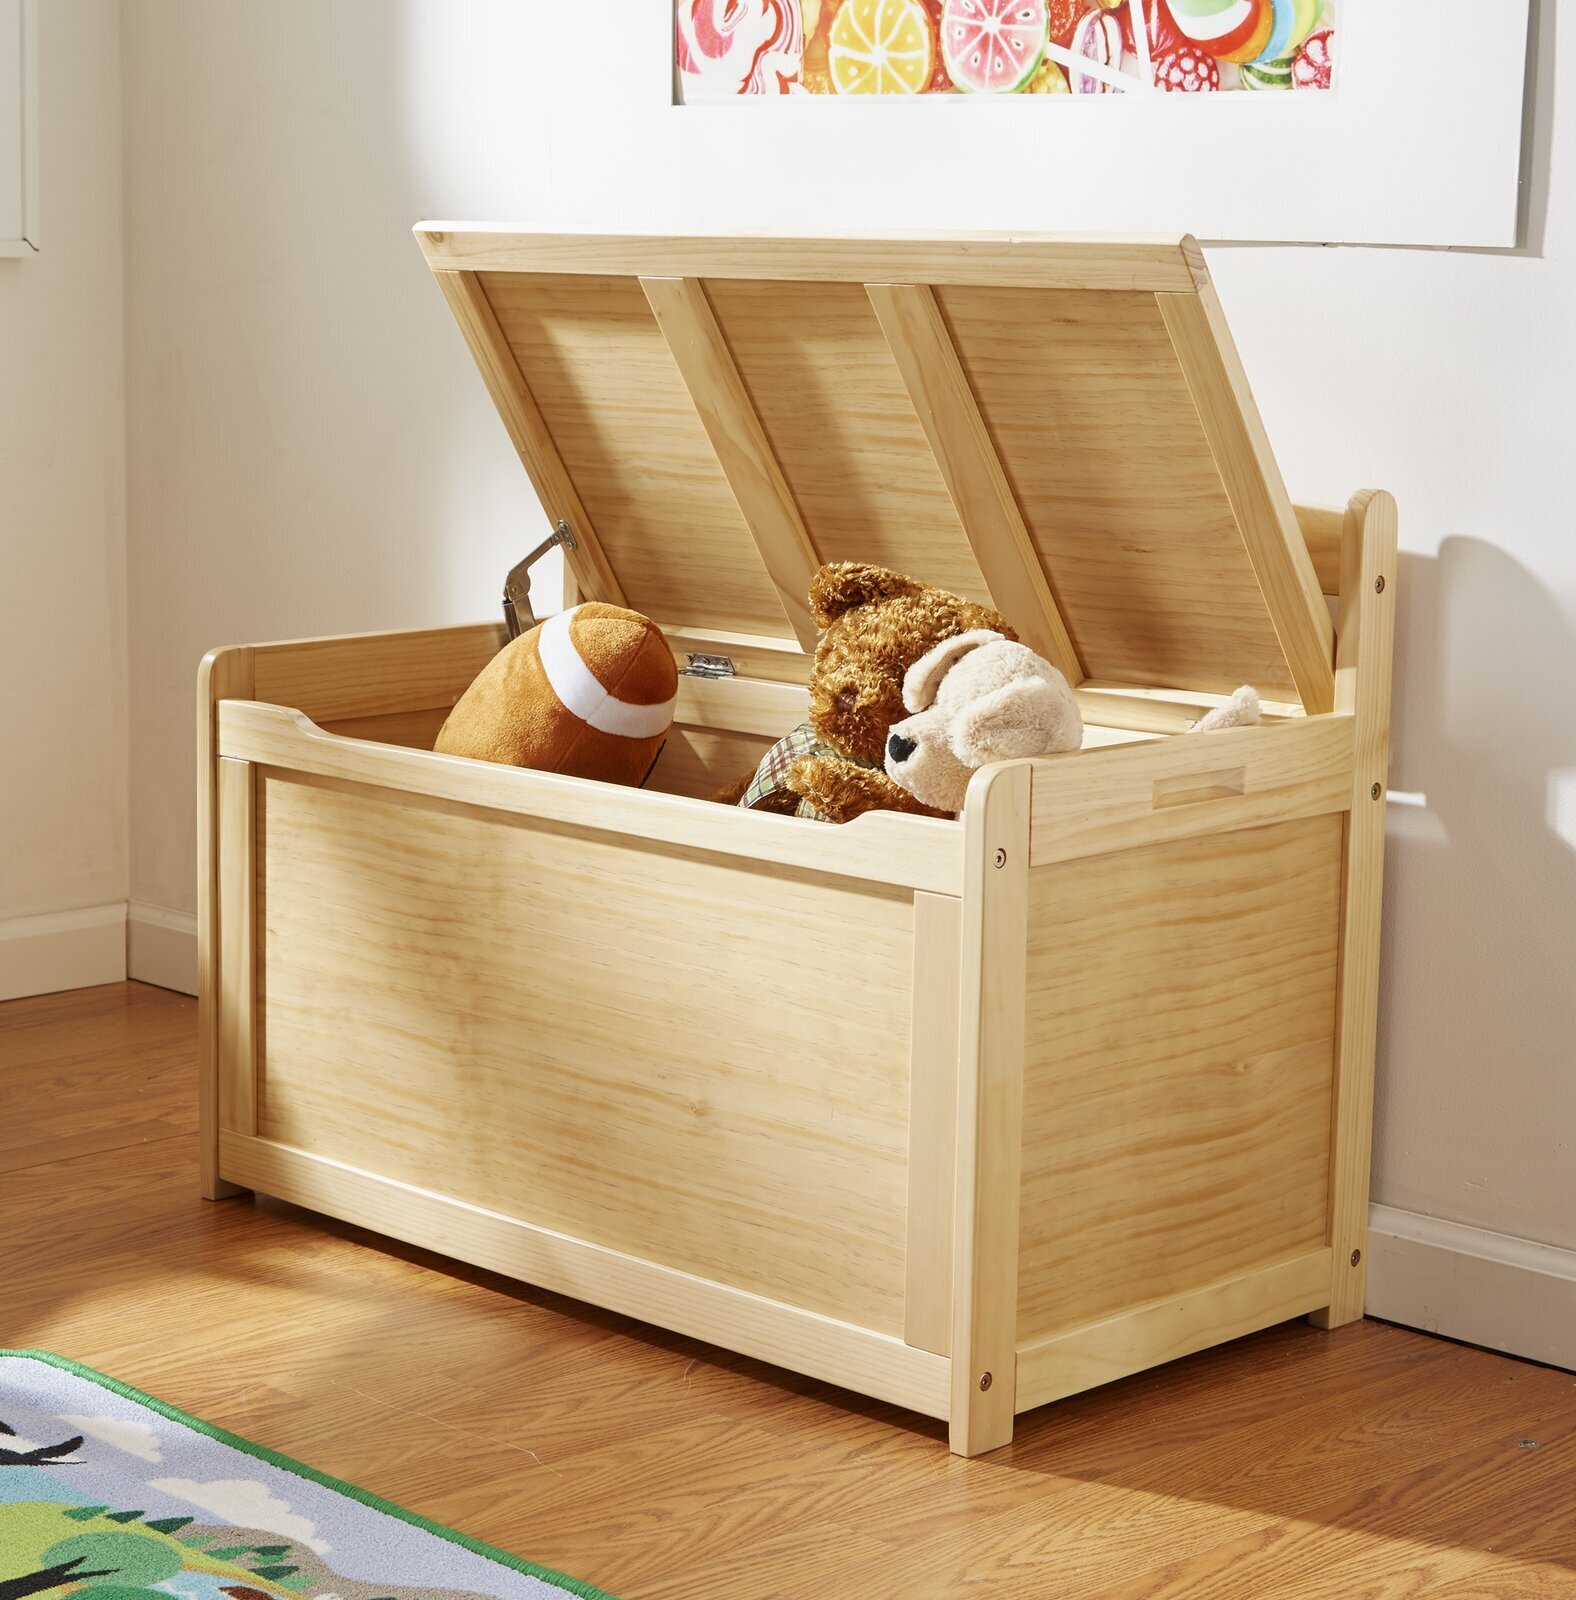 10 Storage Bench Ideas for Kids’ Rooms插图